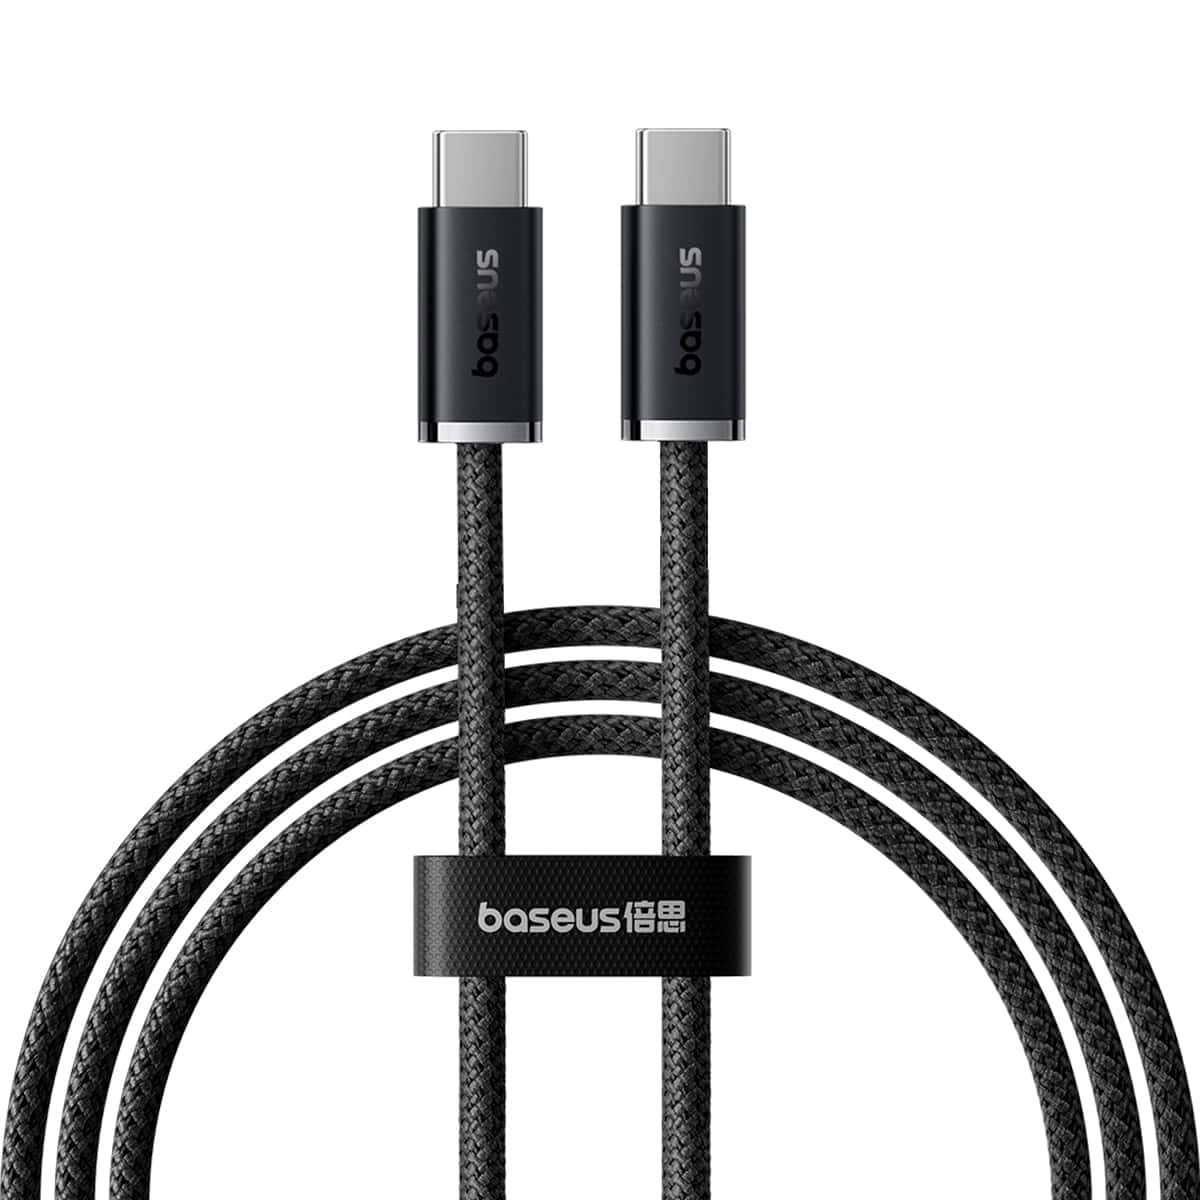 Baseus Dynamic Fast Charging Data Cable Black Price in Pakistan 